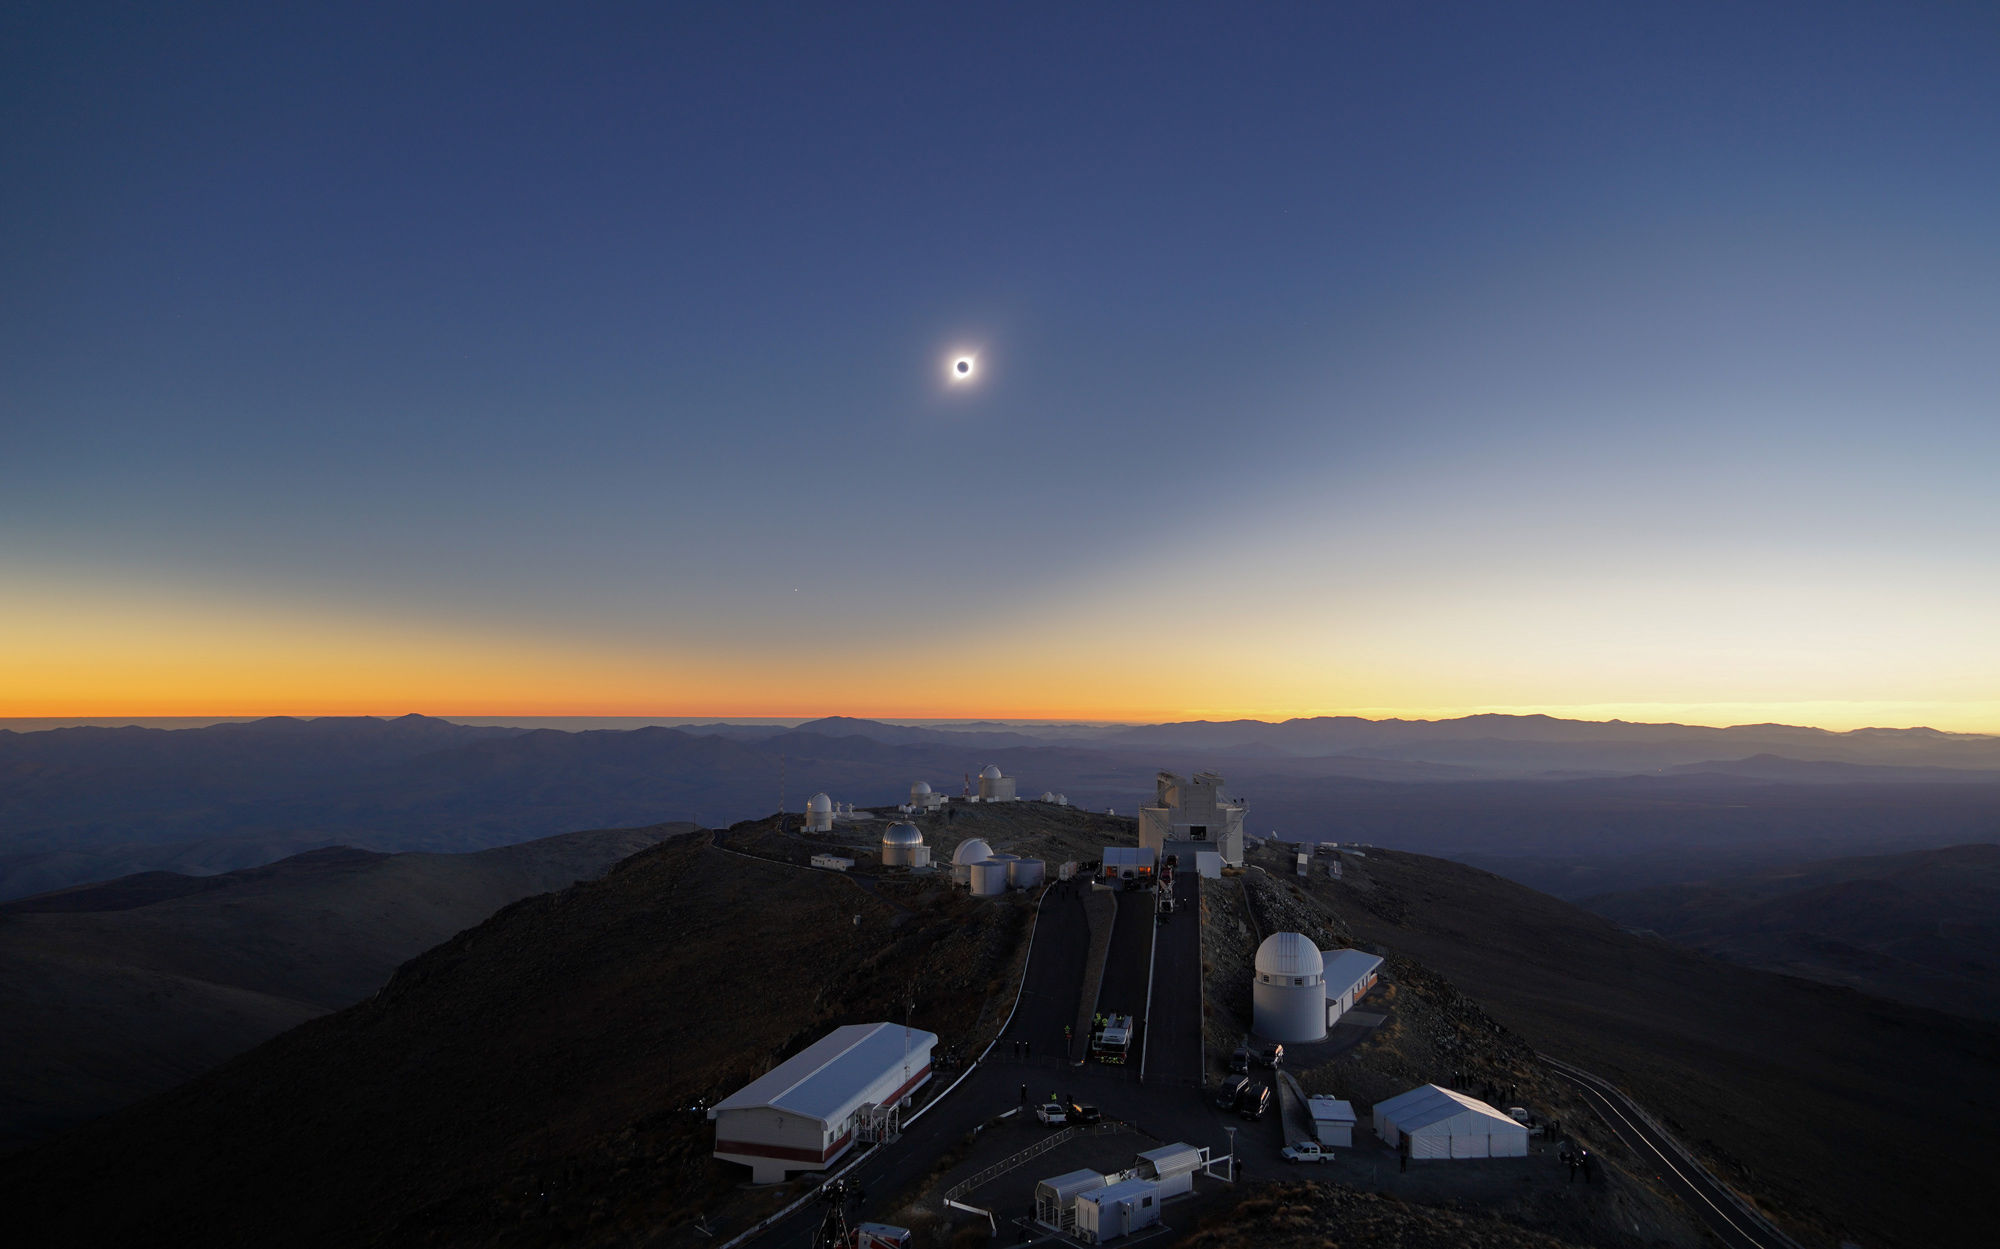 The total solar eclipse of July 2, 2019 over the ESO’s La Silla astronomical observatory in Chile. You can see the shadow of the Moon on the sky itself, a lopsided curve due to perspective. The “star” to the lower left is actually the planet Venus. 